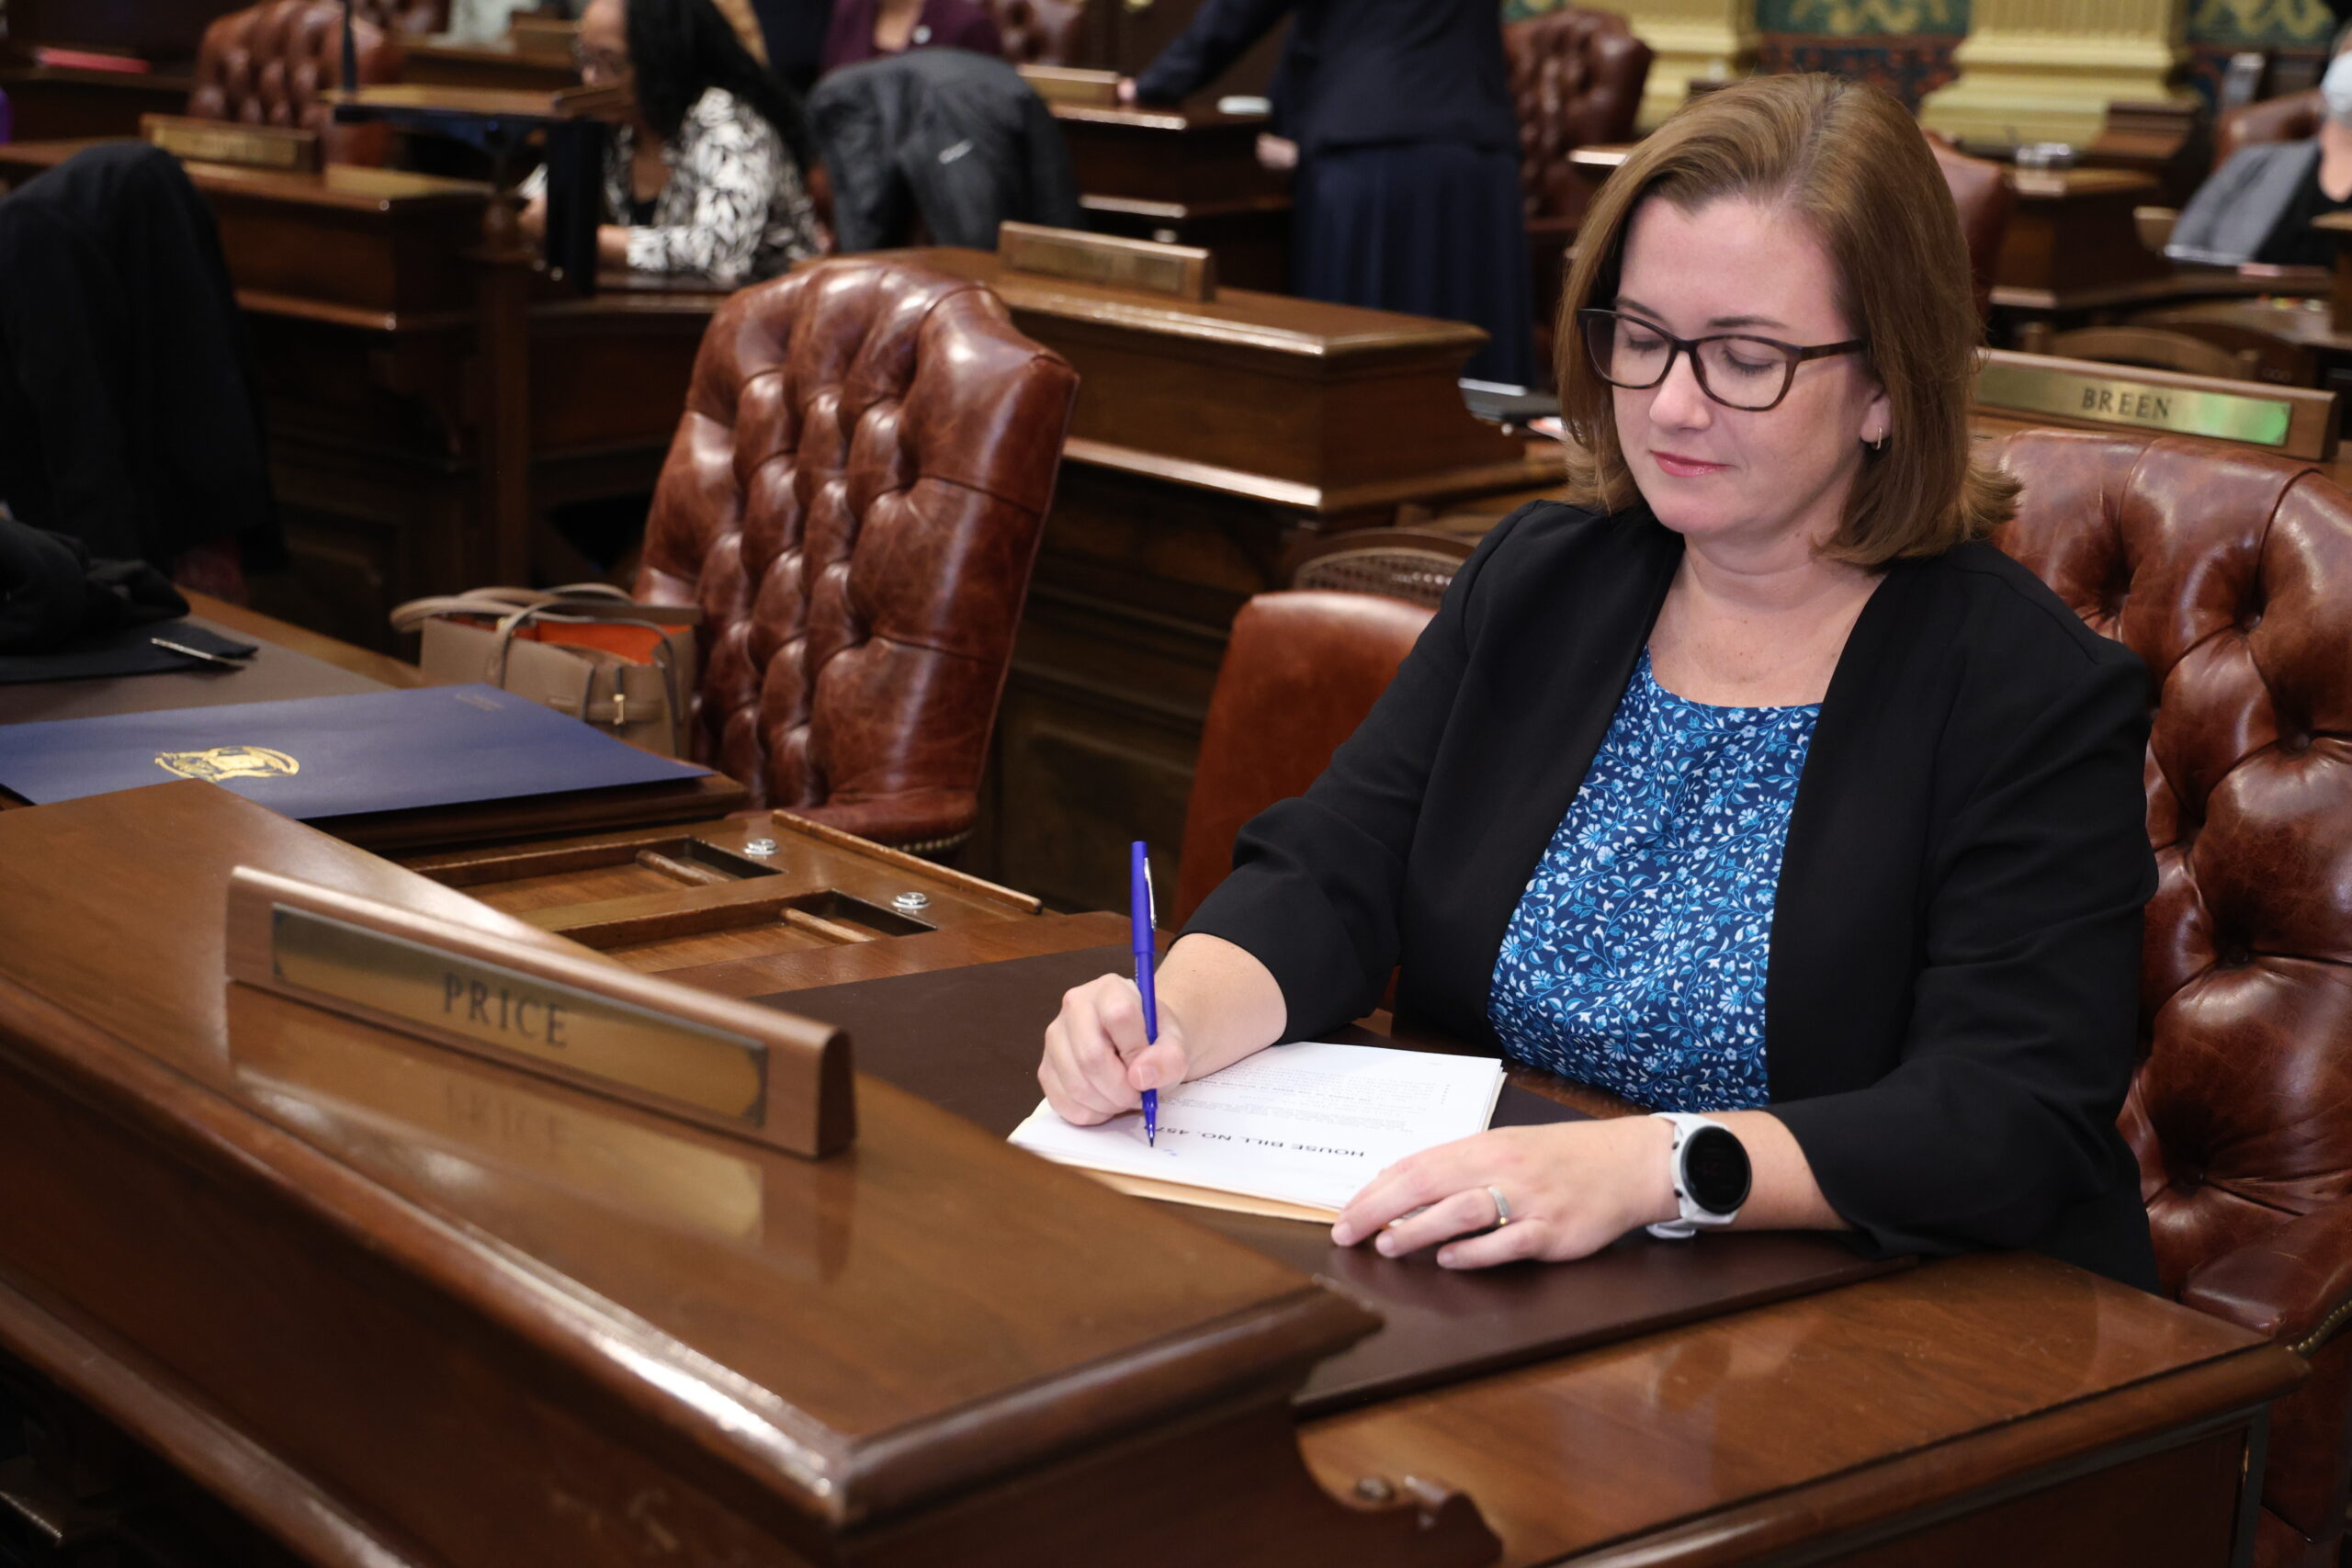 State Rep. Natalie Price writes on a copy of a bill at her desk on the House floor at the Michigan Capitol.